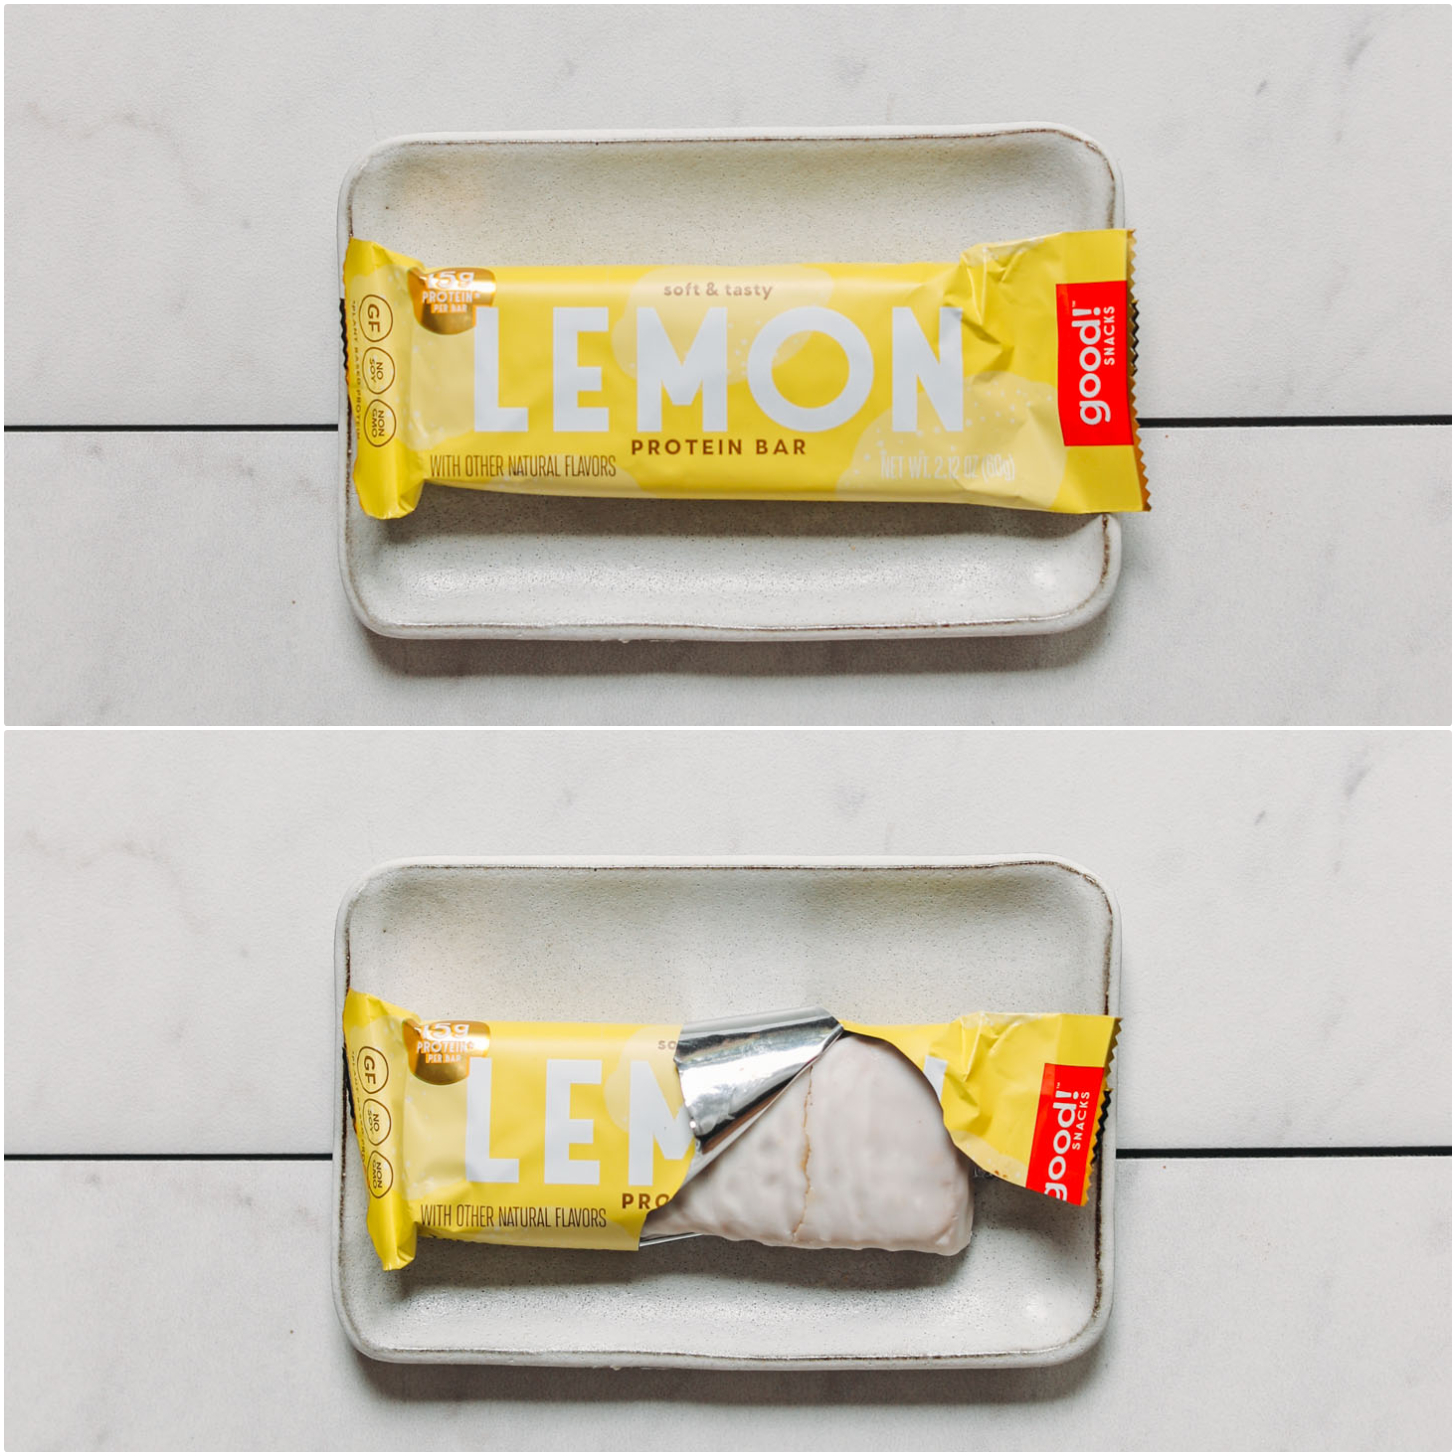 Good Snacks Lemon Protein Bar for our unbiased protein bar review